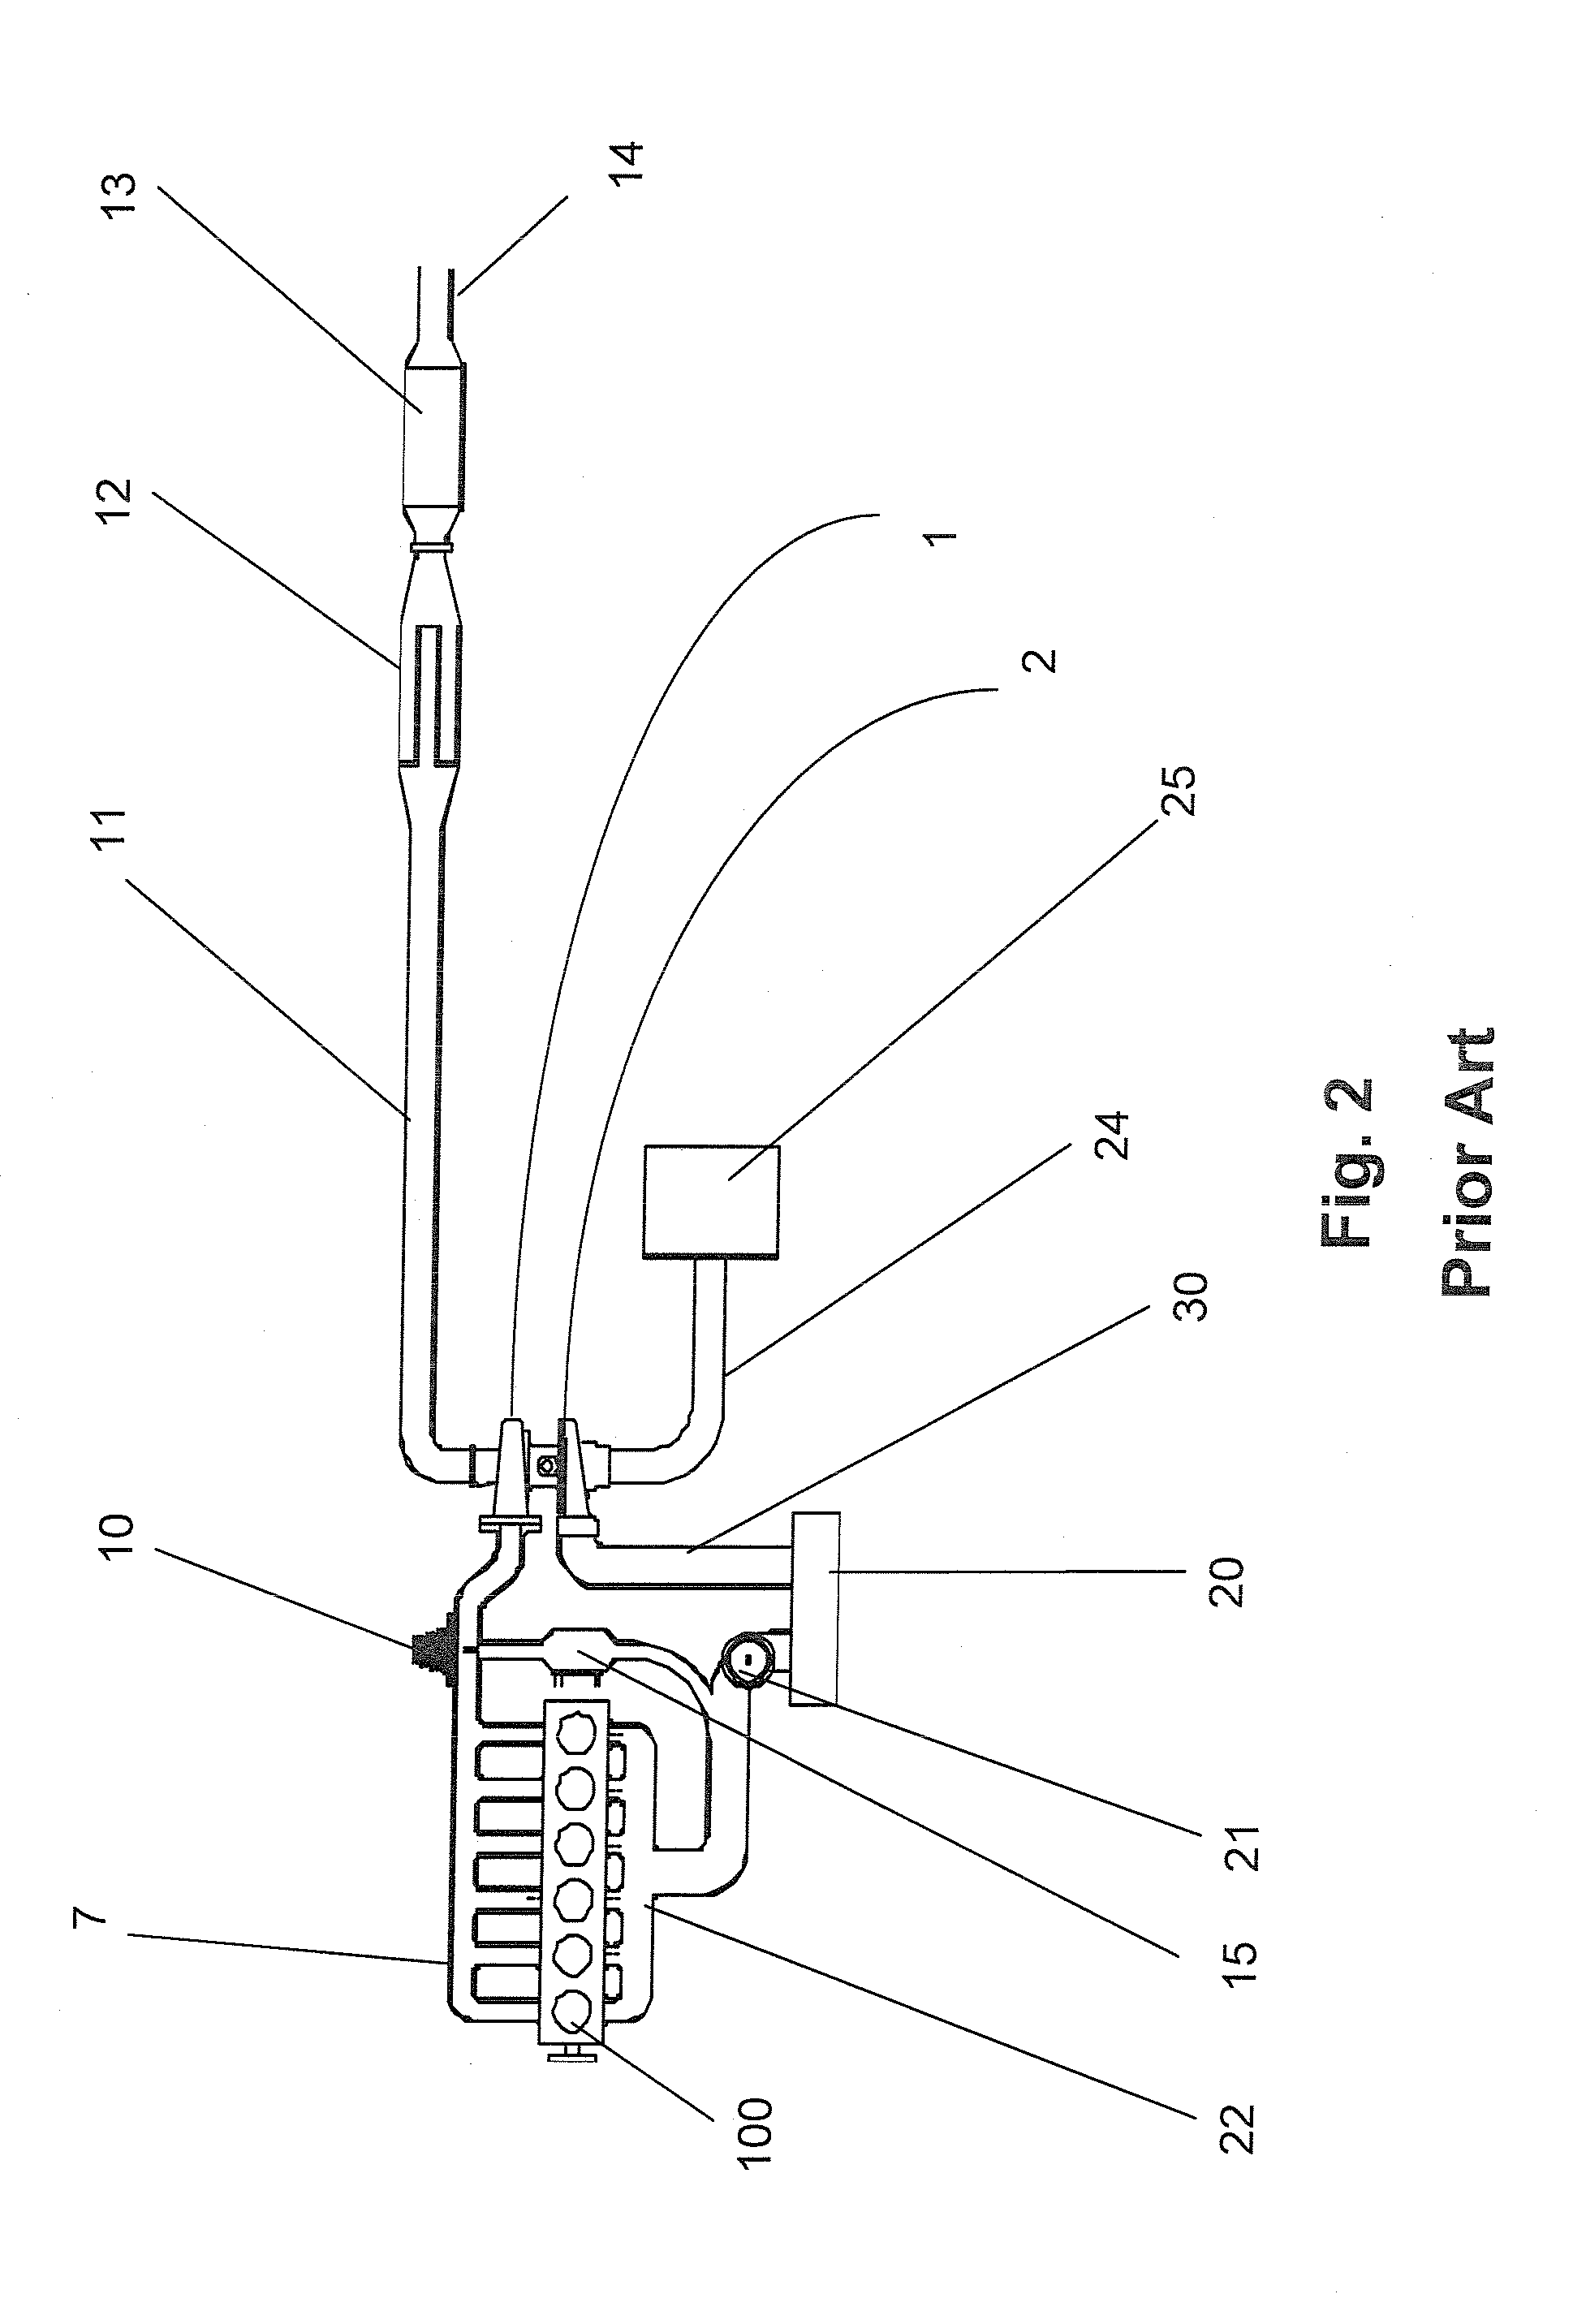 Method for improving the light-off or regeneration behavior of an aftertreatment device in a vehicle system